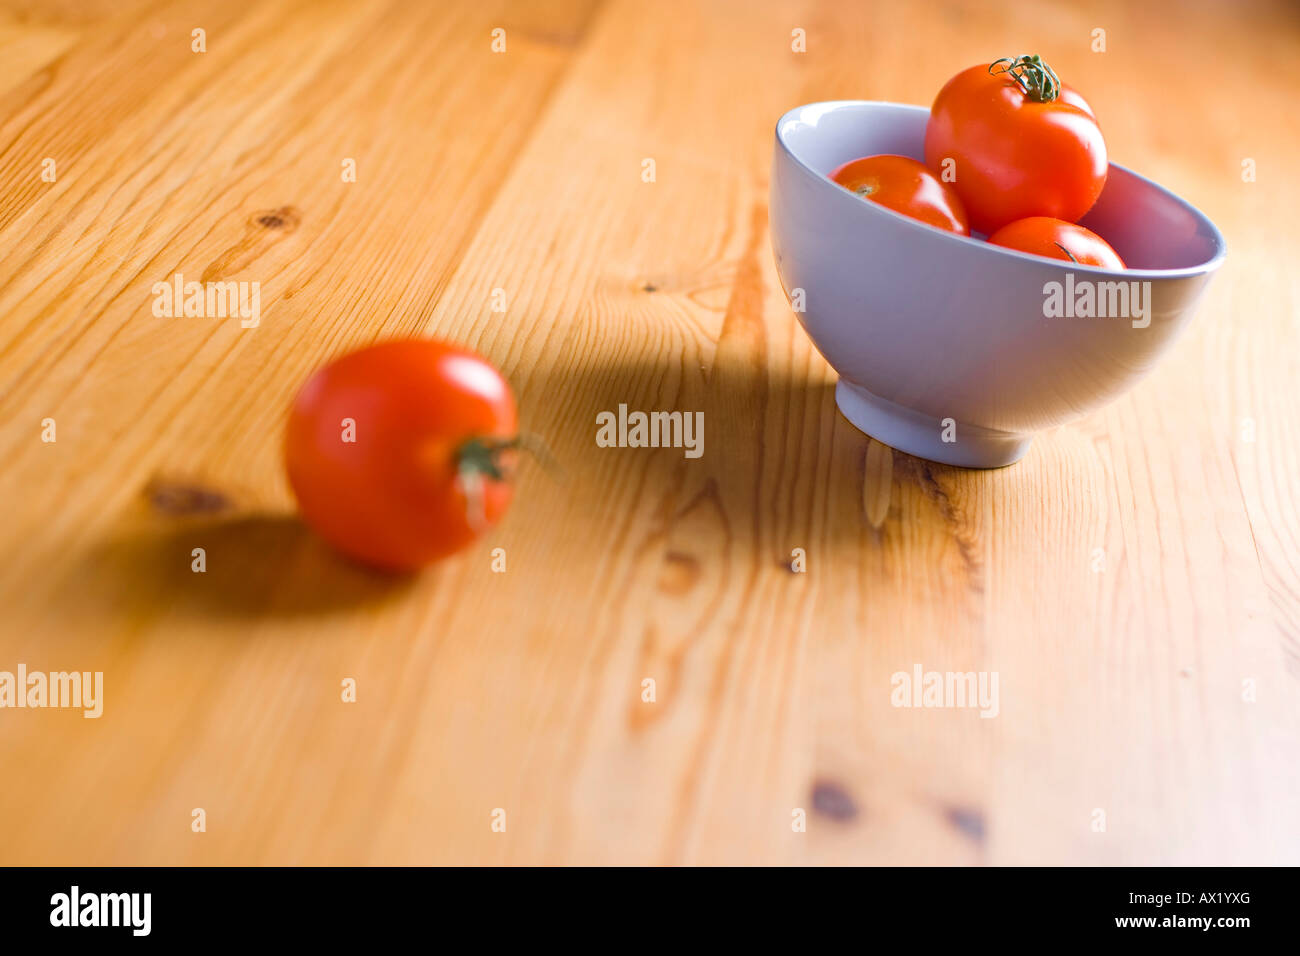 Tomatoes in a bowl Stock Photo